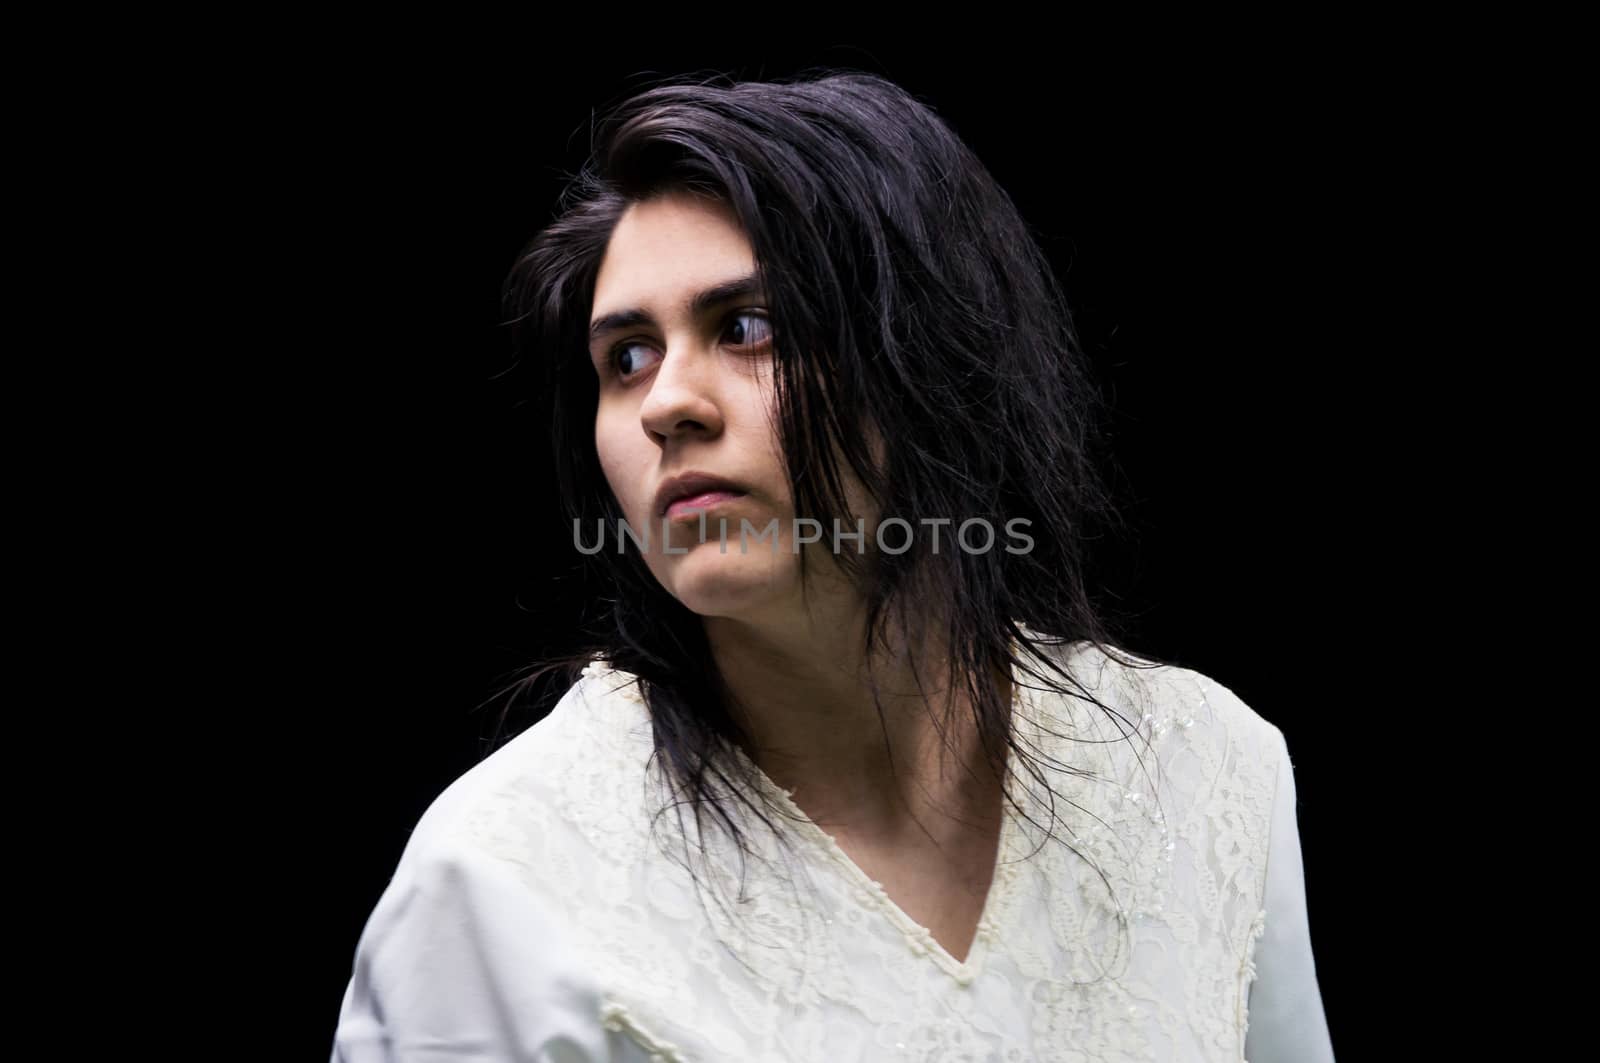 Latina teenager in white standing in front of a black background and looking over her shoulder with a serious expression on her face.